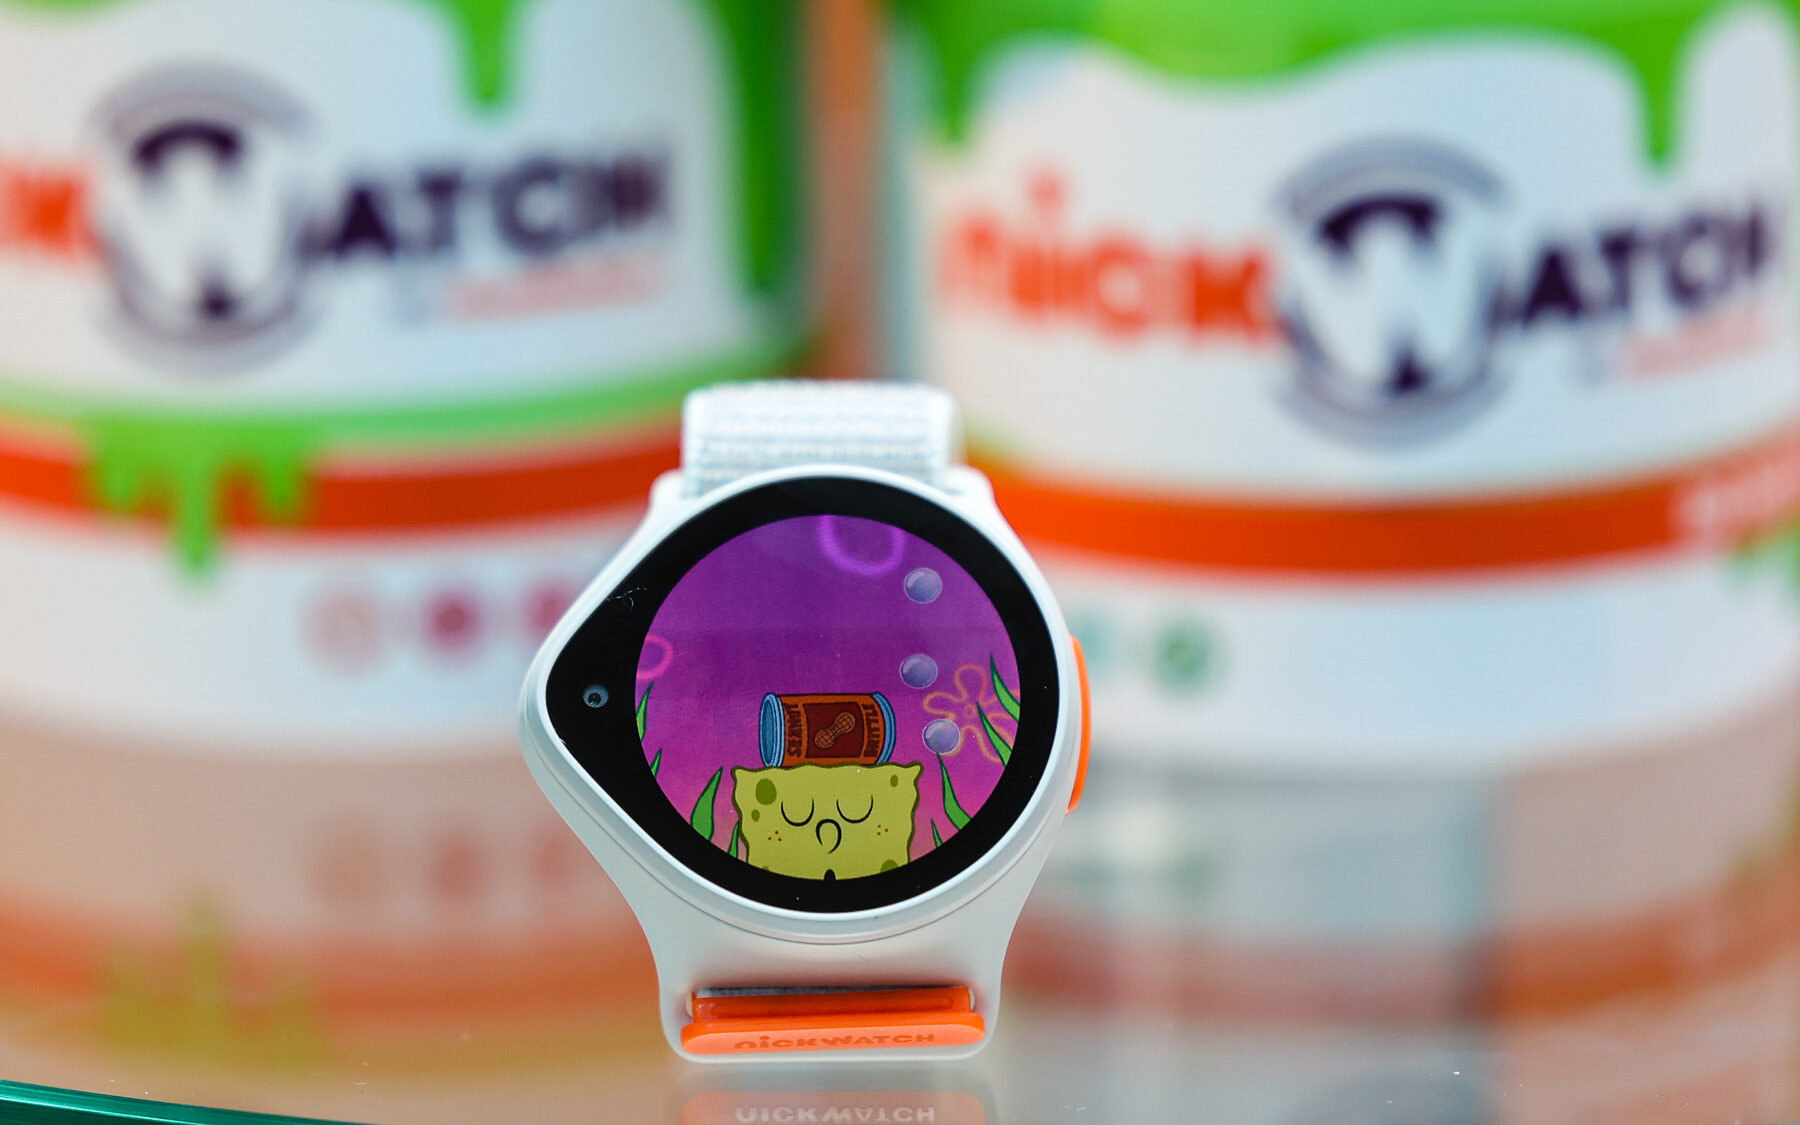 The NickWatch on display at the launch event.